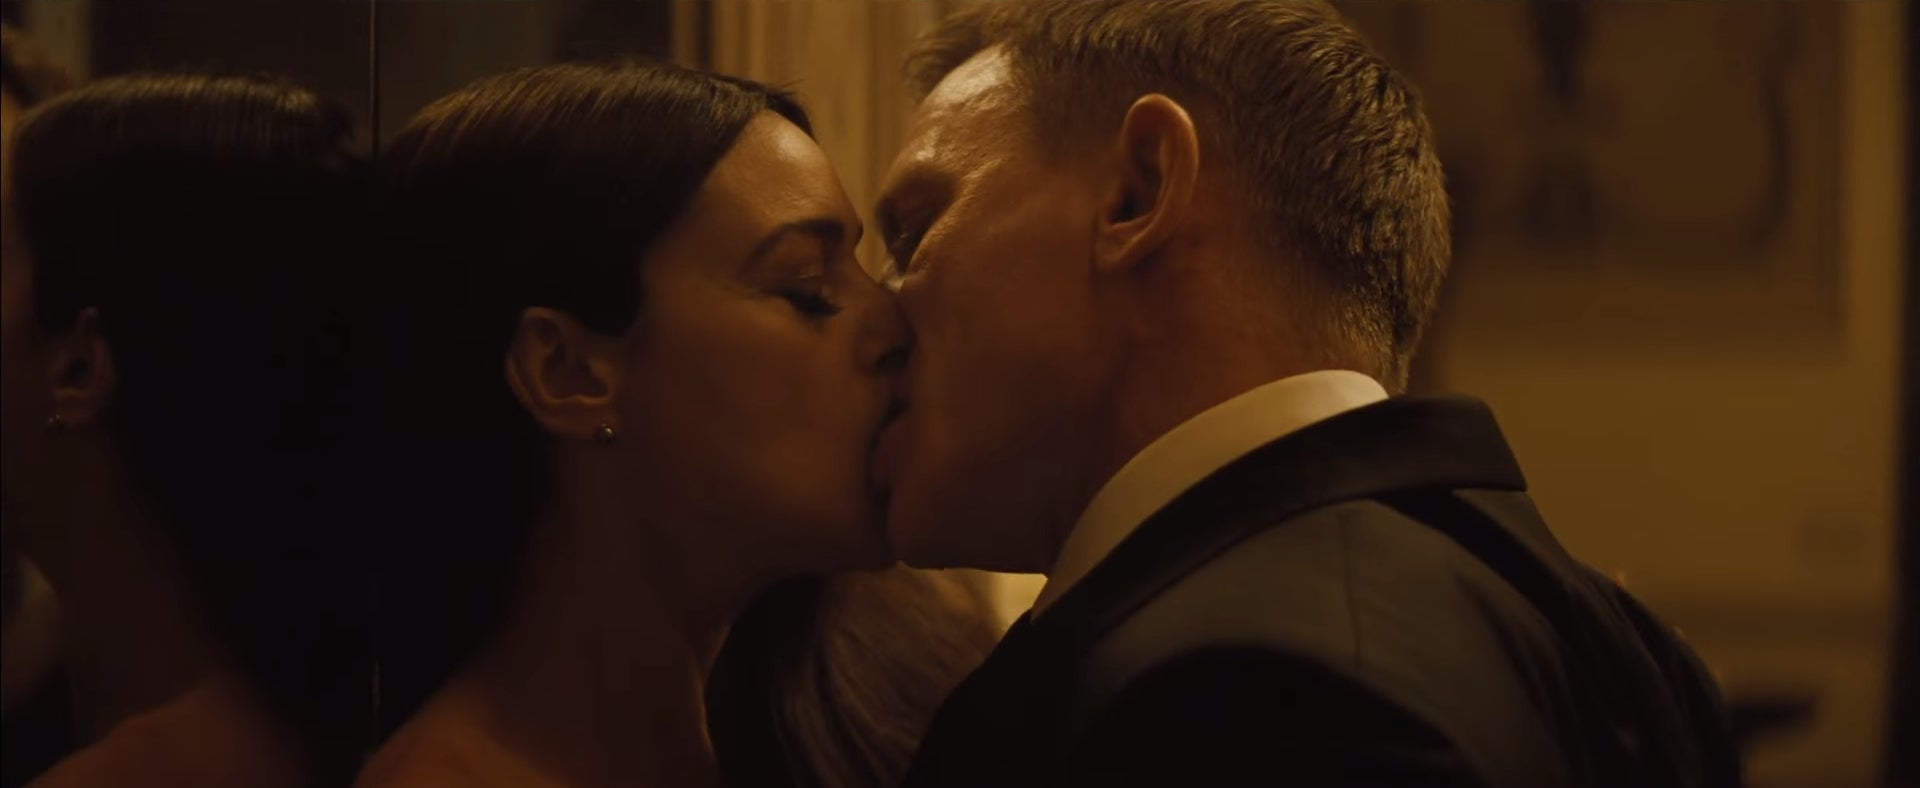 James Bond has India's censor board all hot under the collar